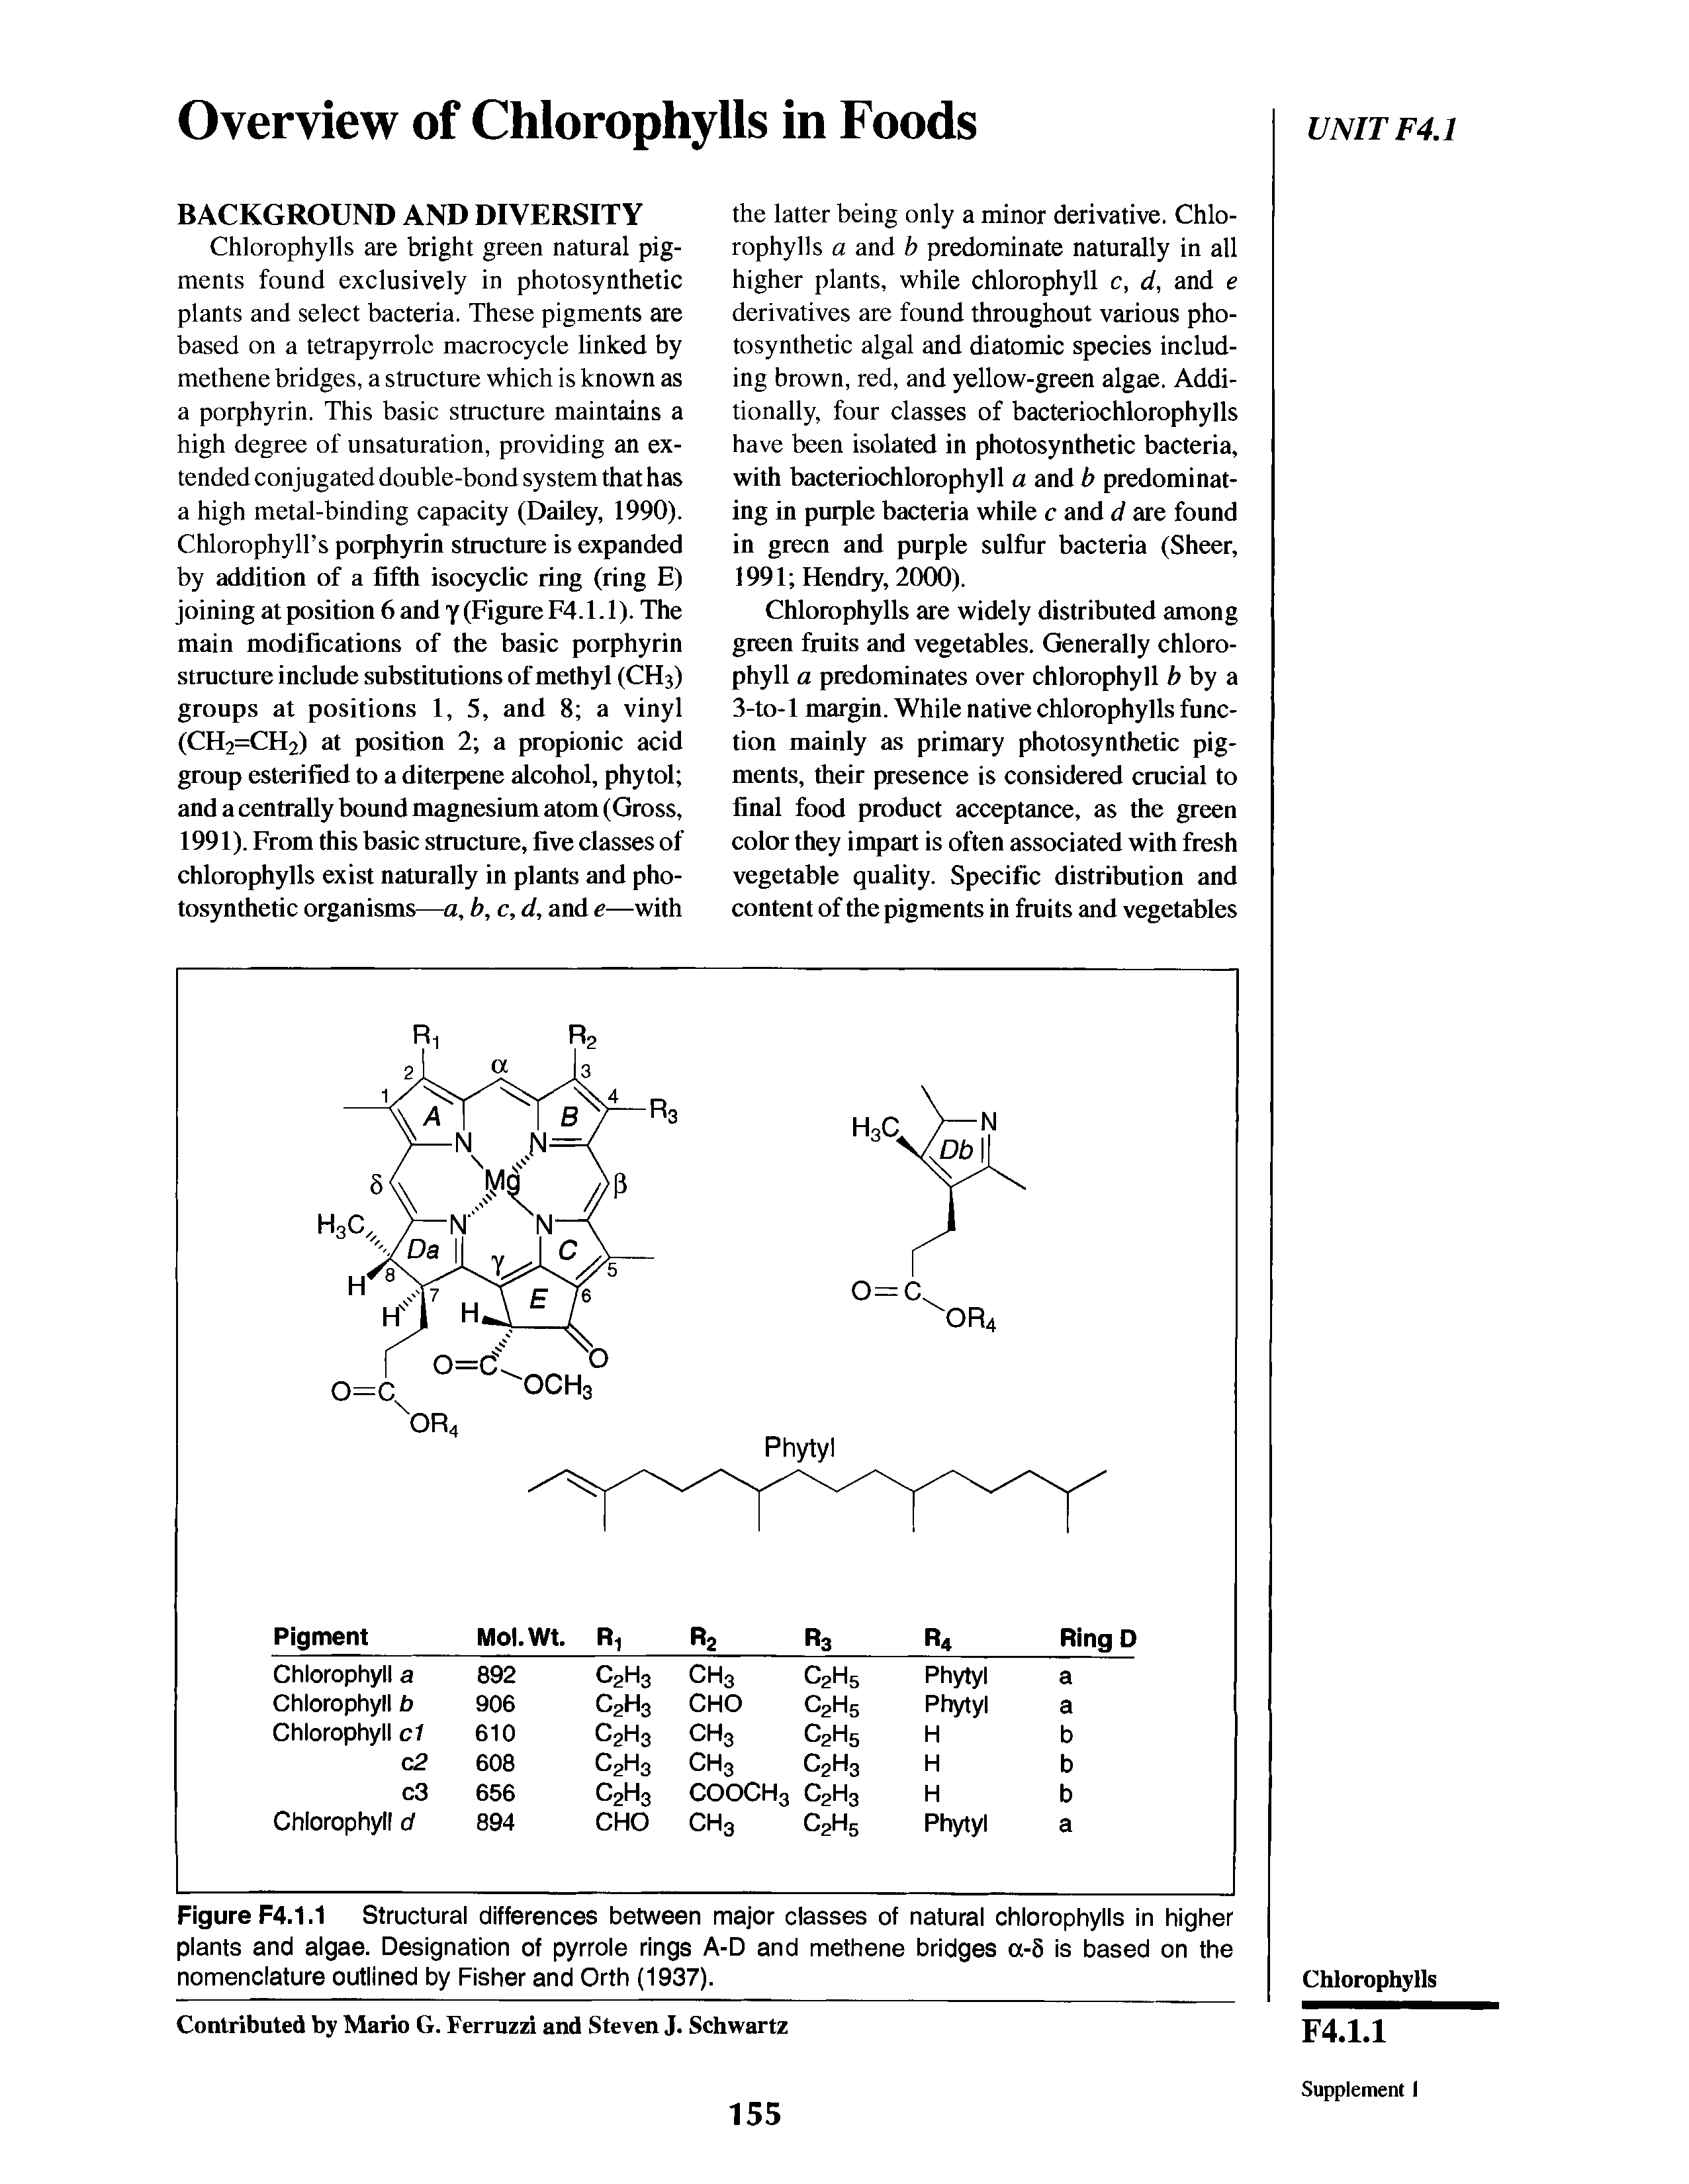 Figure F4.1.1 Structural differences between major classes of natural chlorophylls in higher plants and algae. Designation of pyrrole rings A-D and methene bridges a-5 is based on the nomenclature outlined by Fisher and Orth (1937).